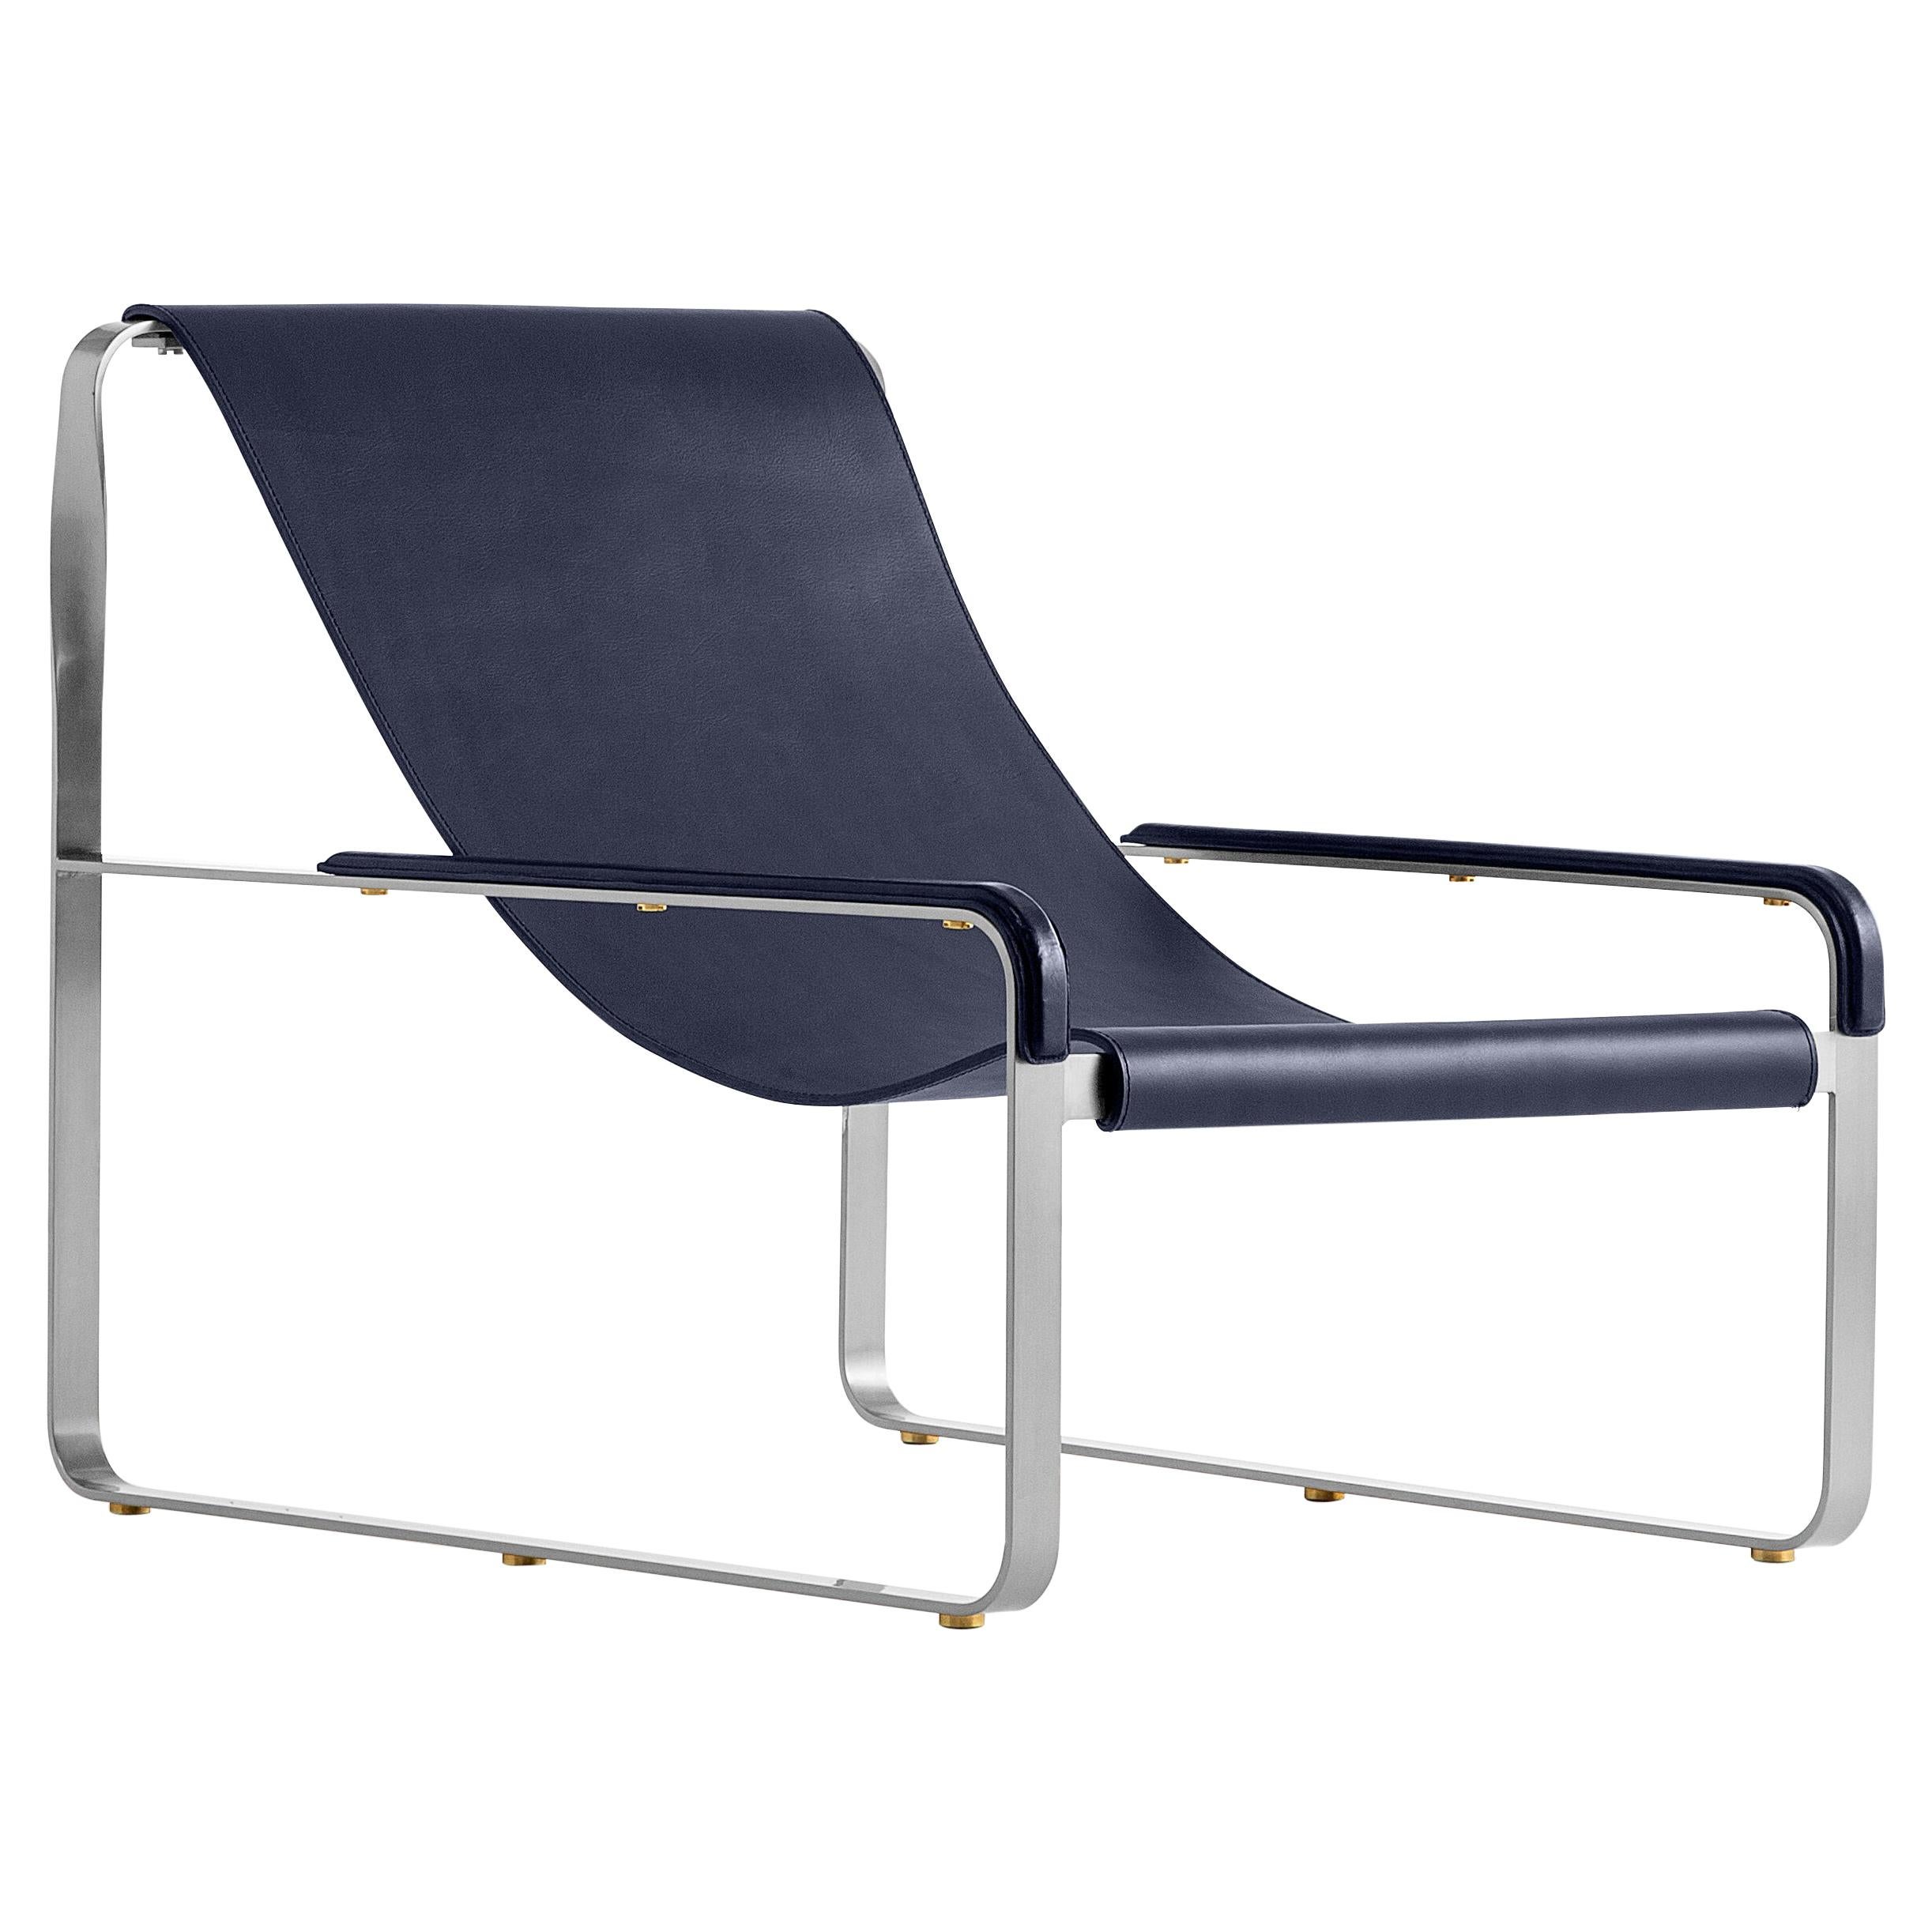 Handmade Classic Contemporary Chaise Lounge Old Silver Metal & Navy Blue Leather